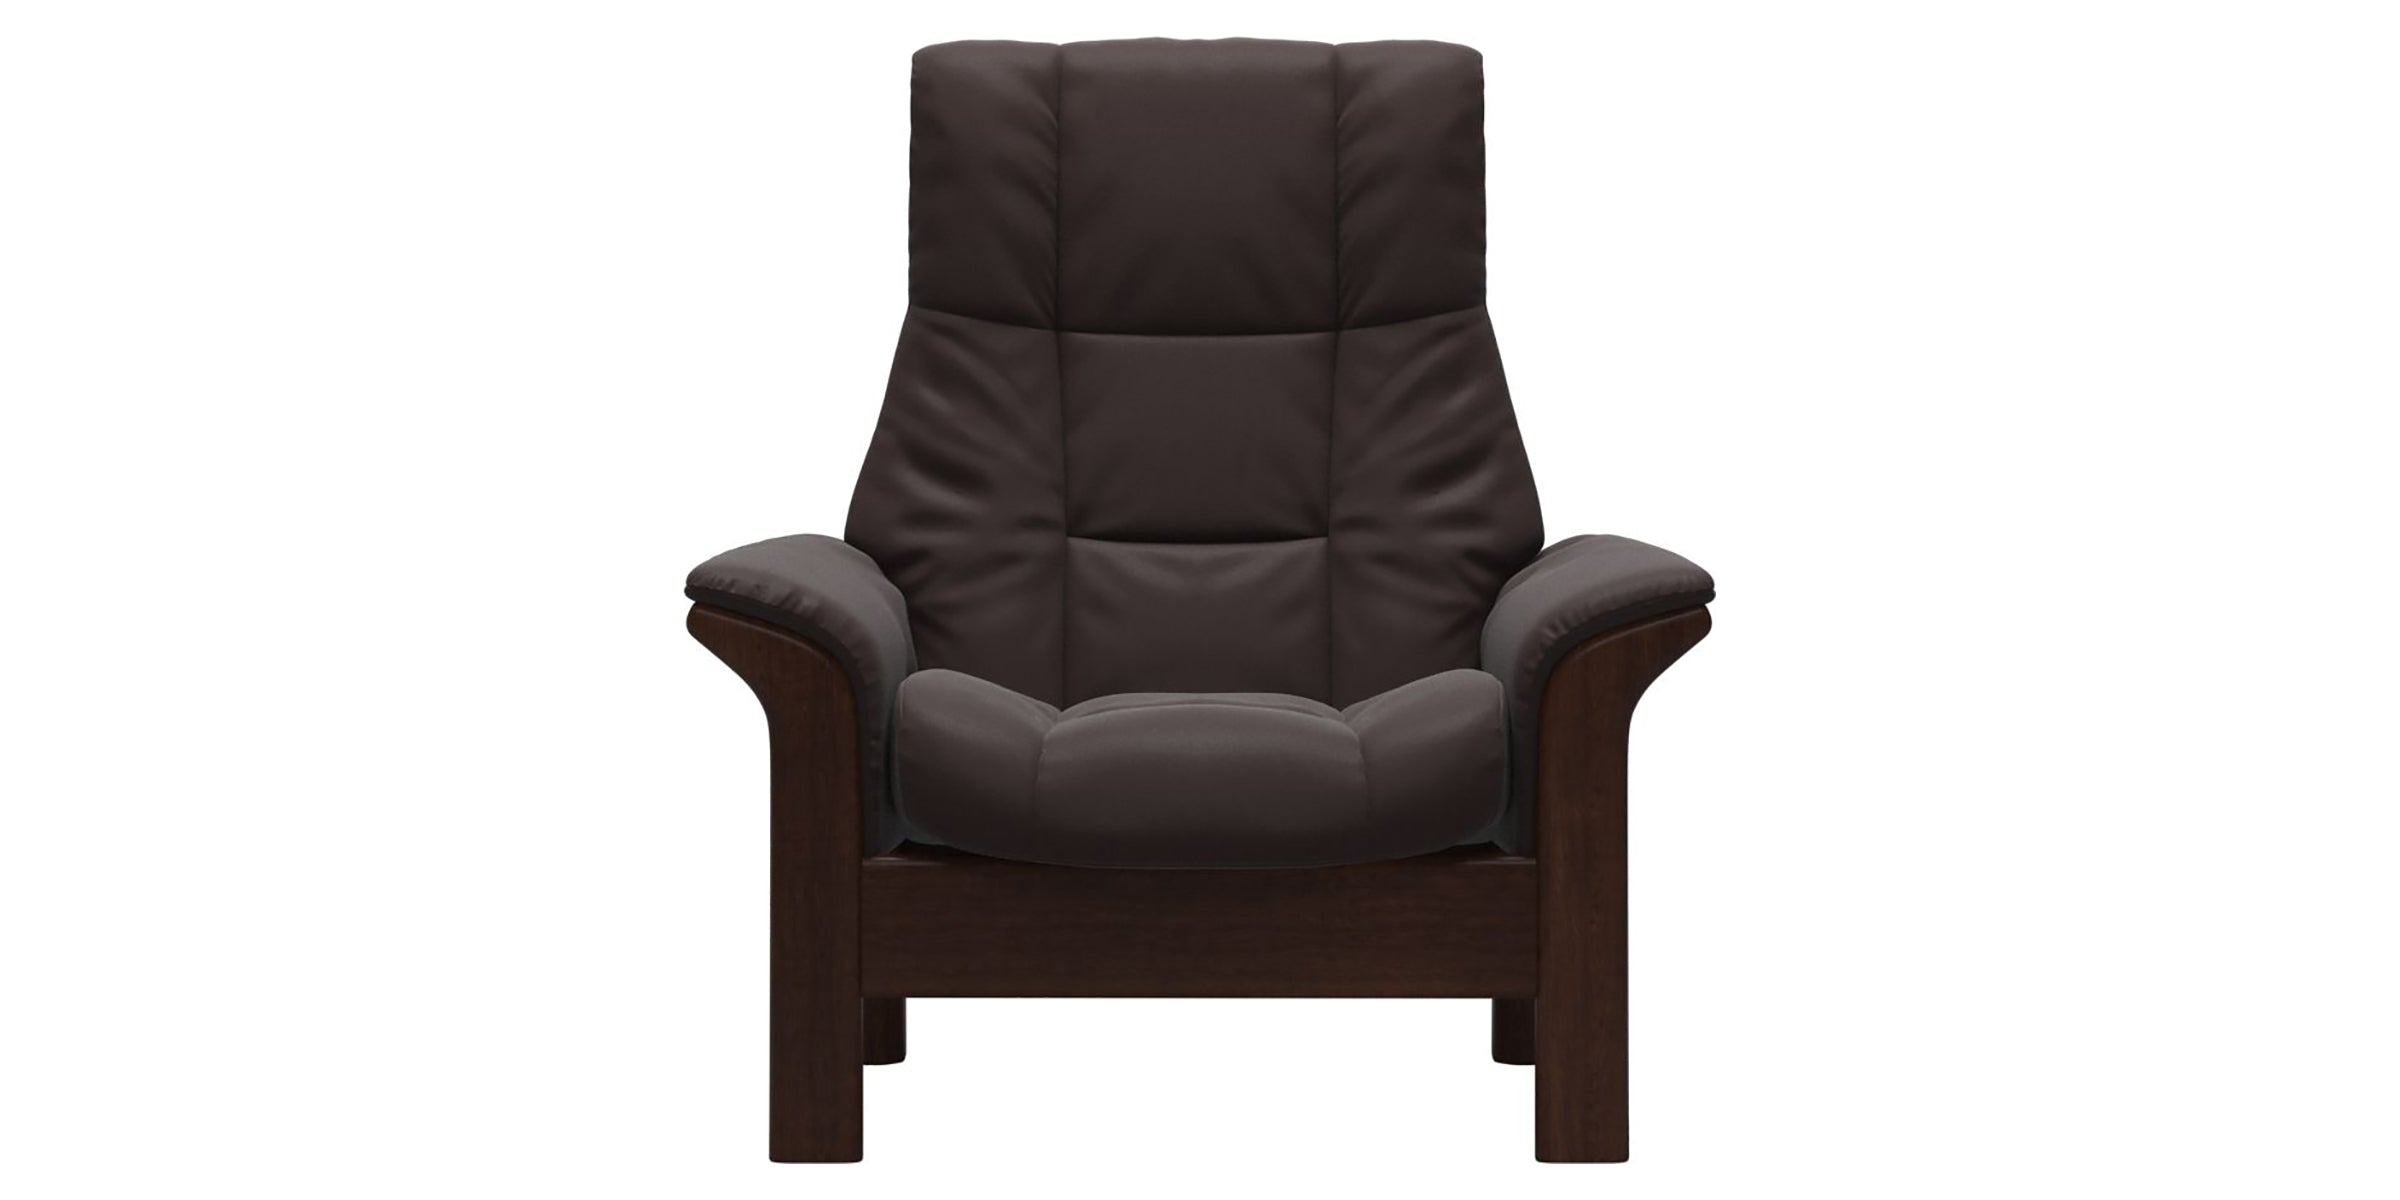 Paloma Leather Chocolate and Brown Base | Stressless Windsor High Back Chair | Valley Ridge Furniture